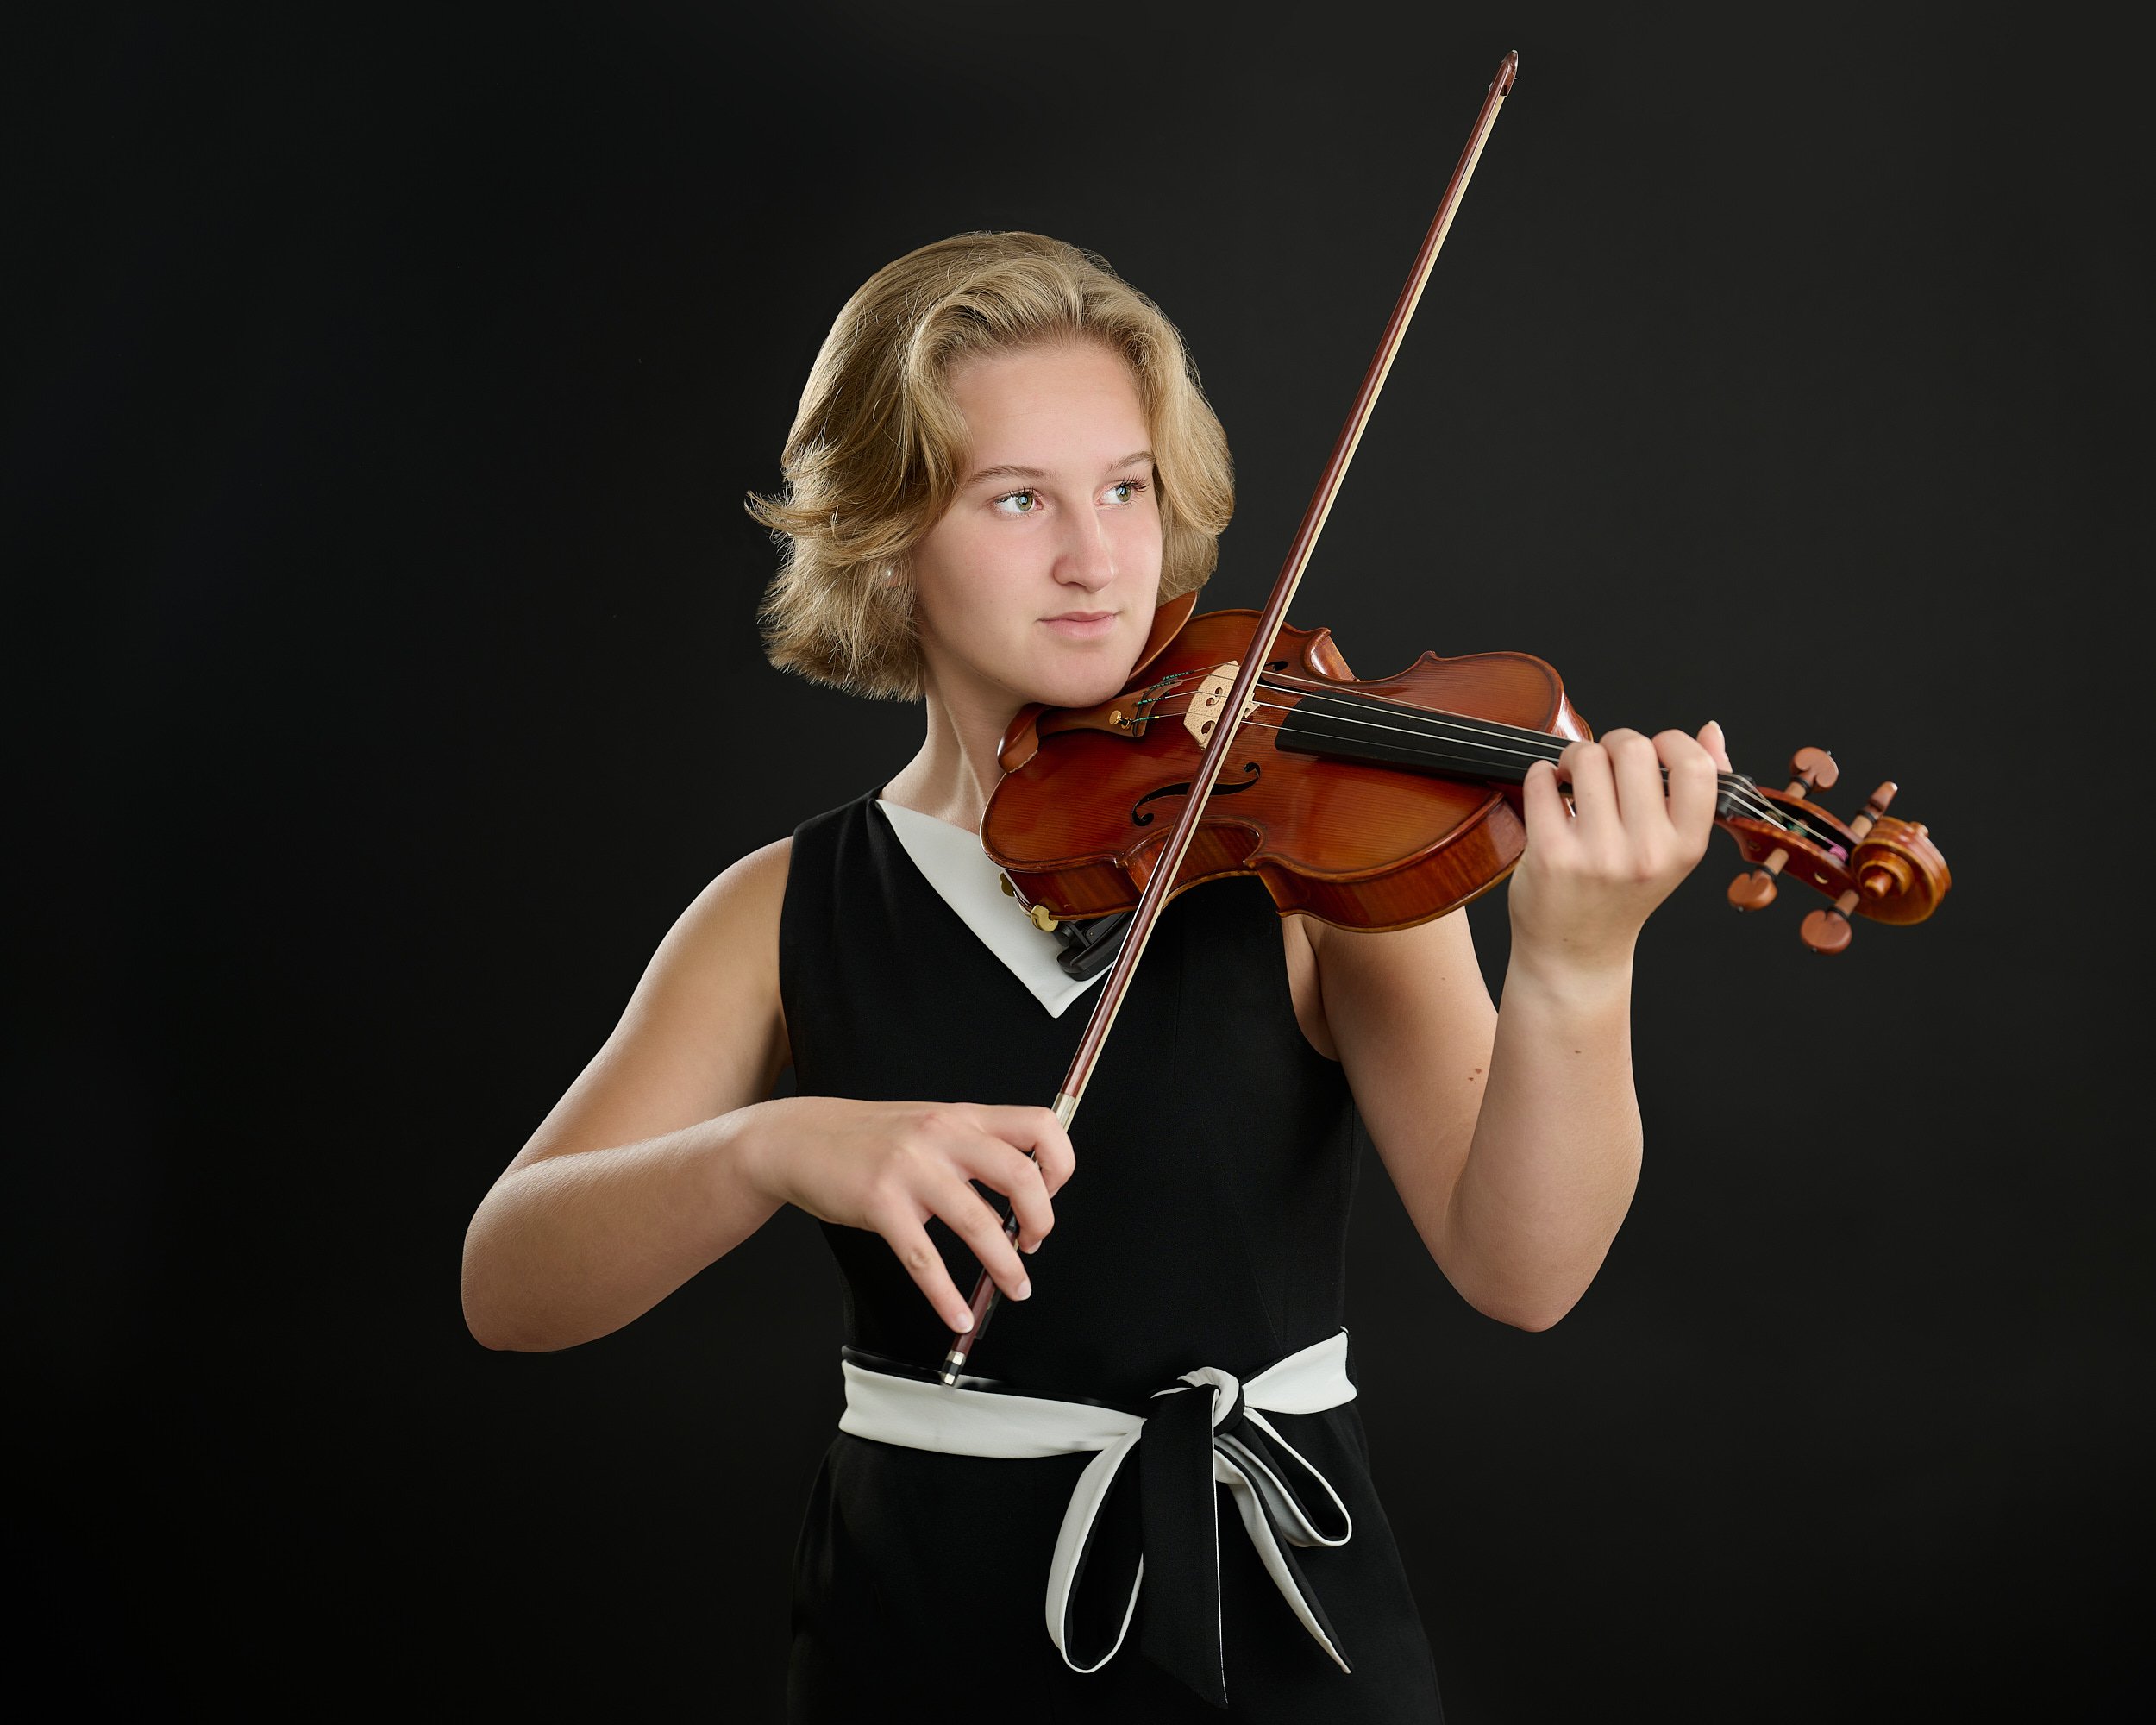  HOUSTON, TEXAS - JUNE 15TH 2022: a beautiful 16-year-old girl with fair skin and short blond hair is posing for studio portraits with her violin made by the string instruments maker Phillip Injeian. 